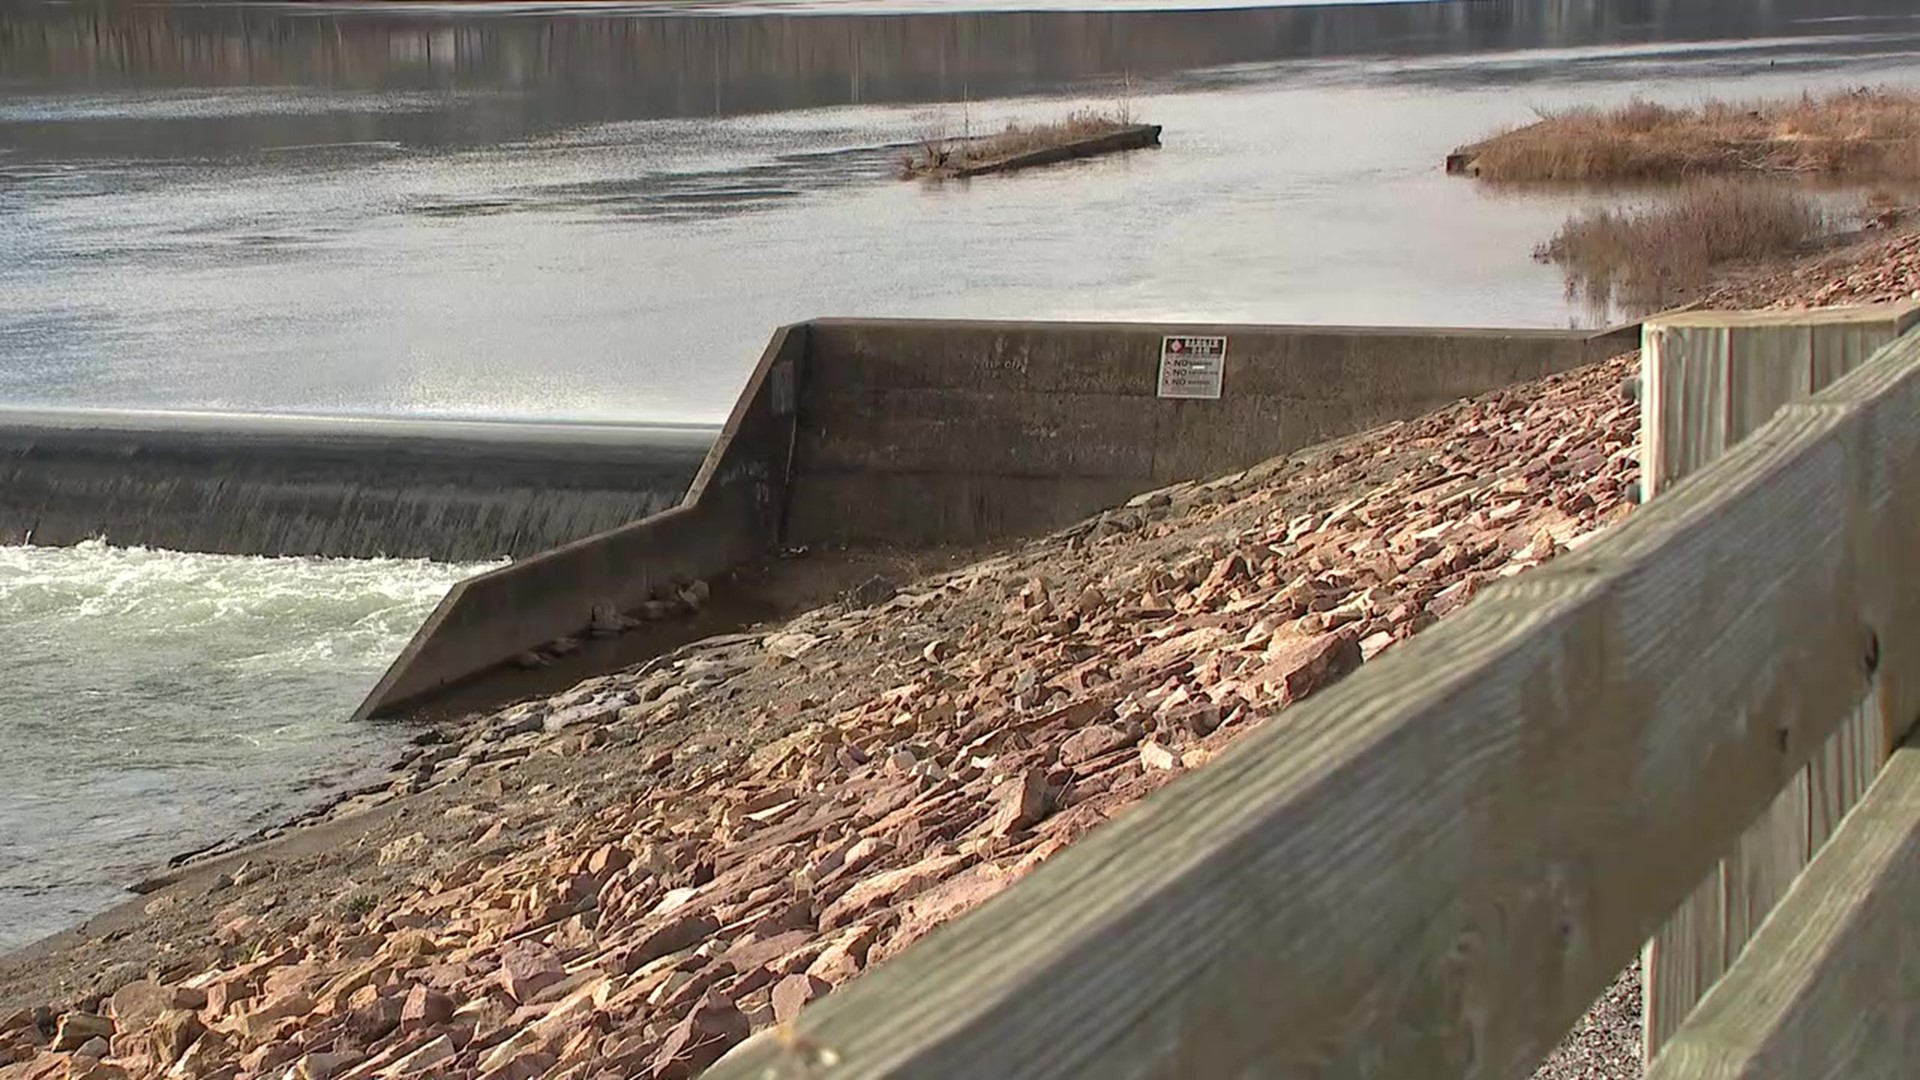 A floodwater protection project in Williamsport is one step closer.